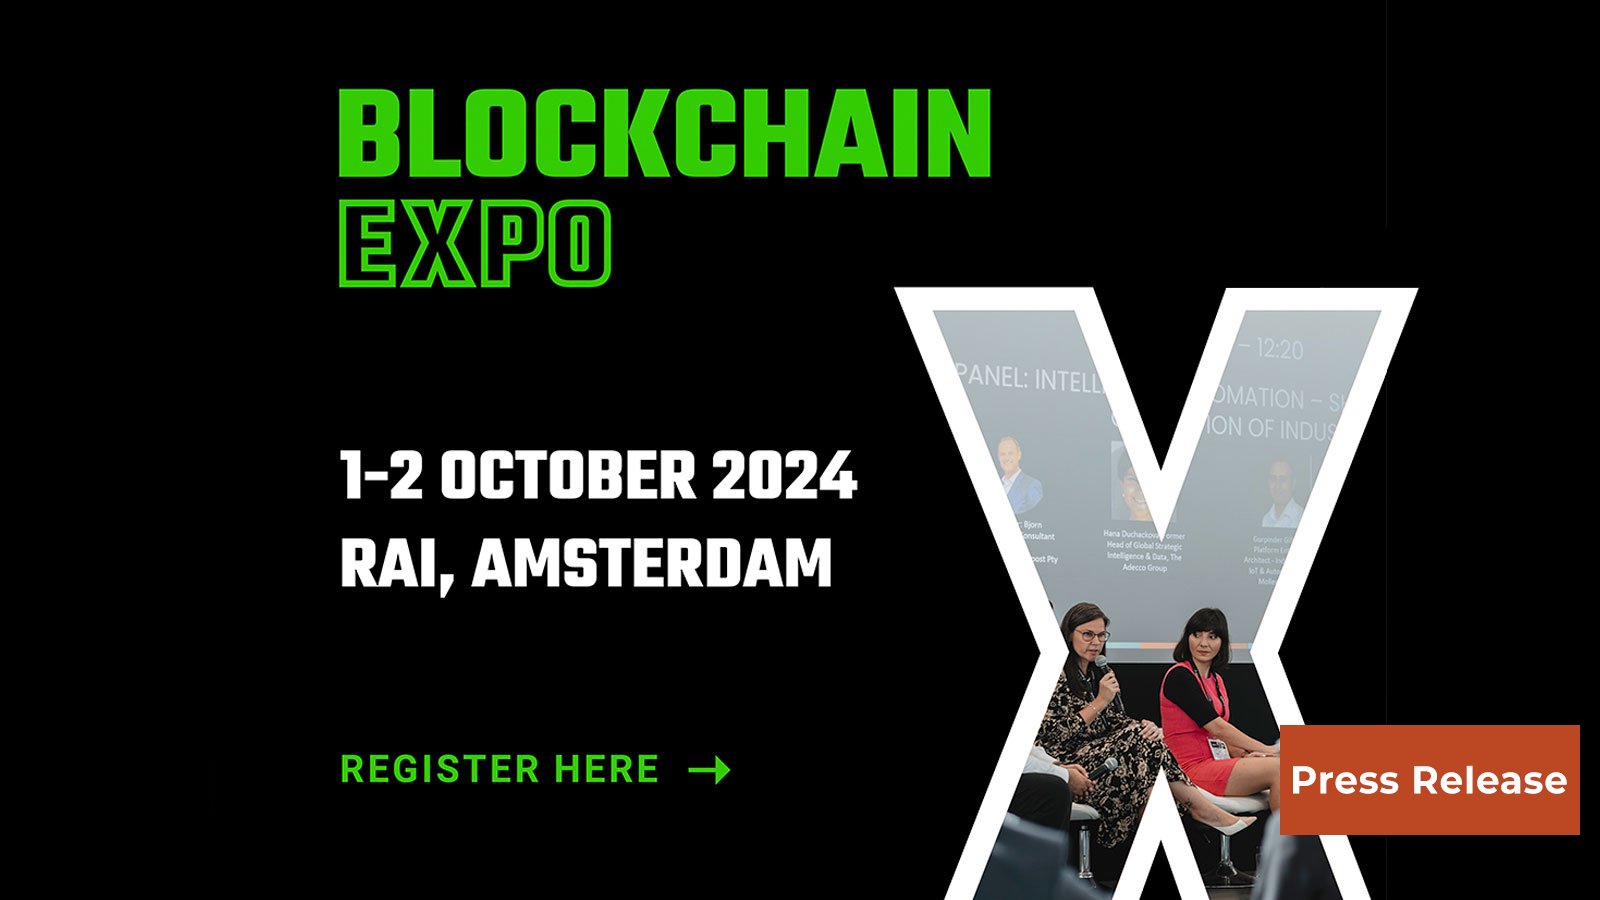 Blockchain Expo Returns to RAI Amsterdam in October 2024 and is set to showcase the latest in crypto innovation.